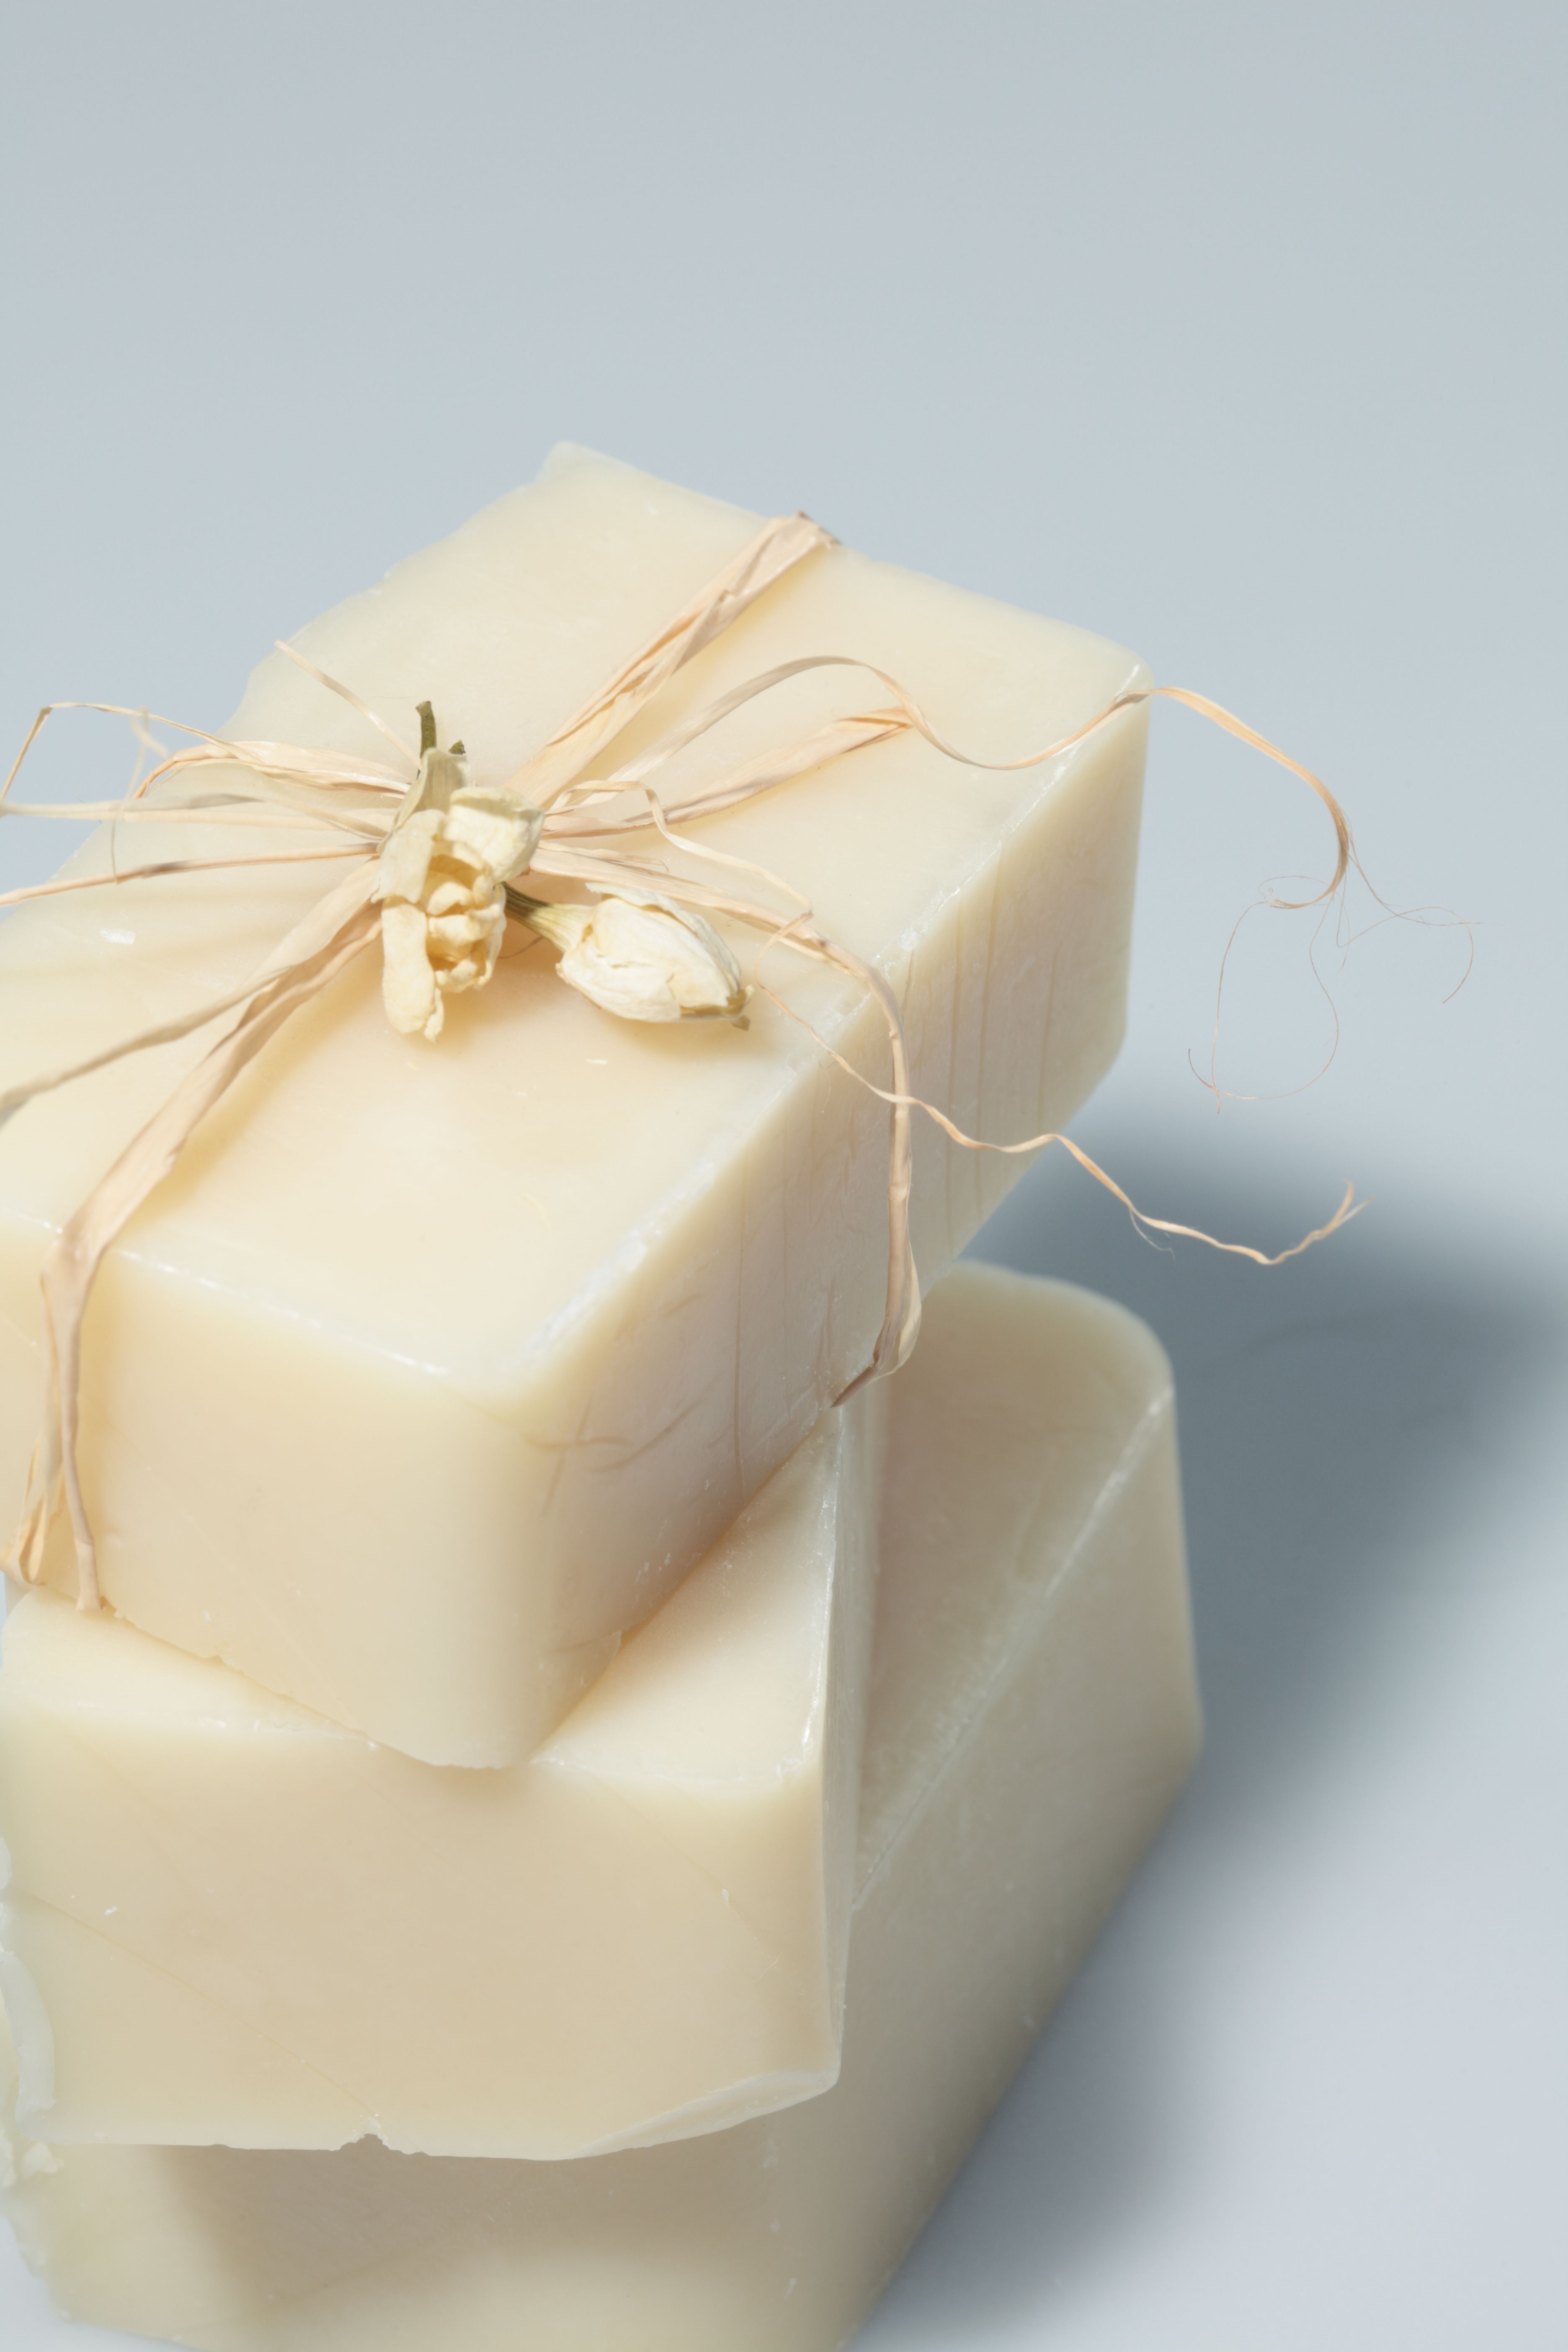 basic-and-easy-homemade-soap-making-recipes